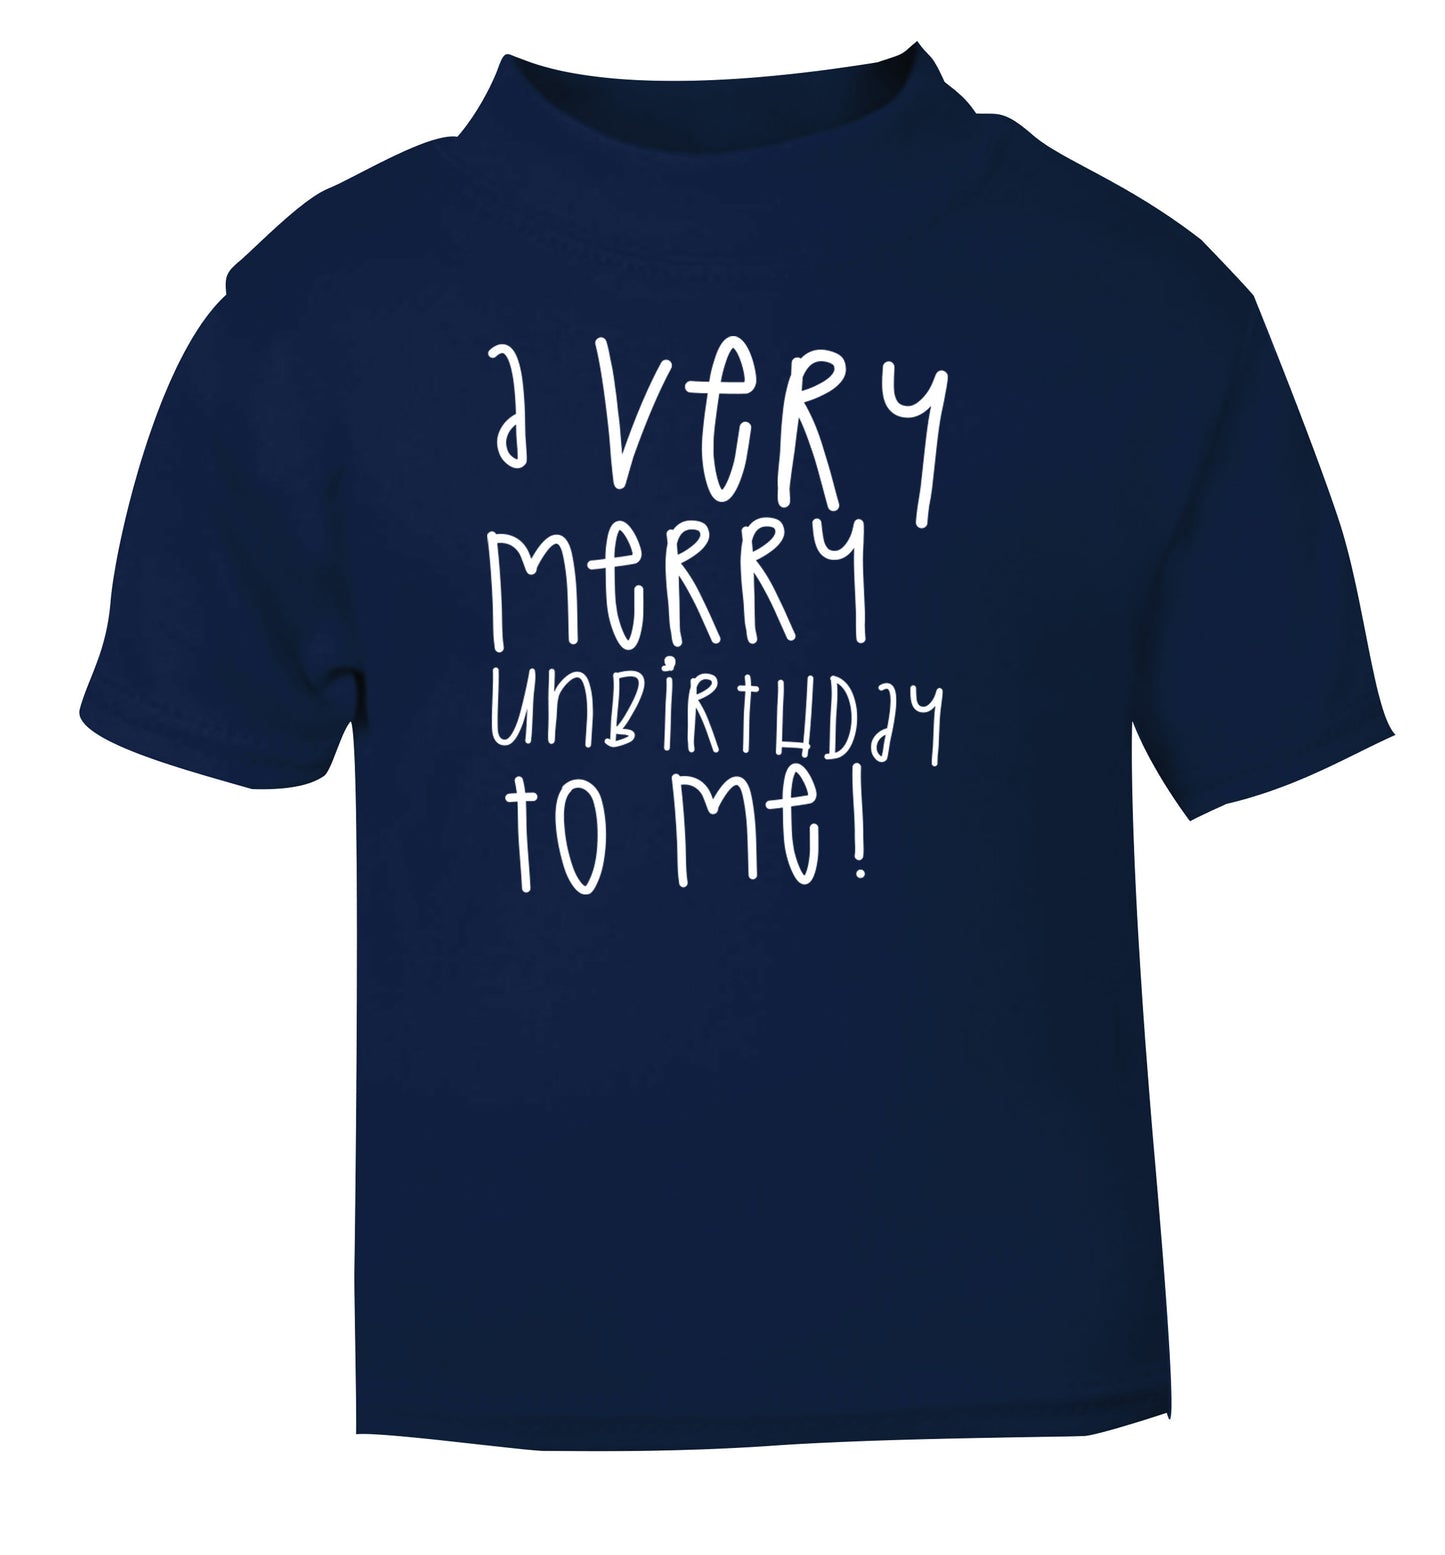 A very merry unbirthday to me! navy Baby Toddler Tshirt 2 Years